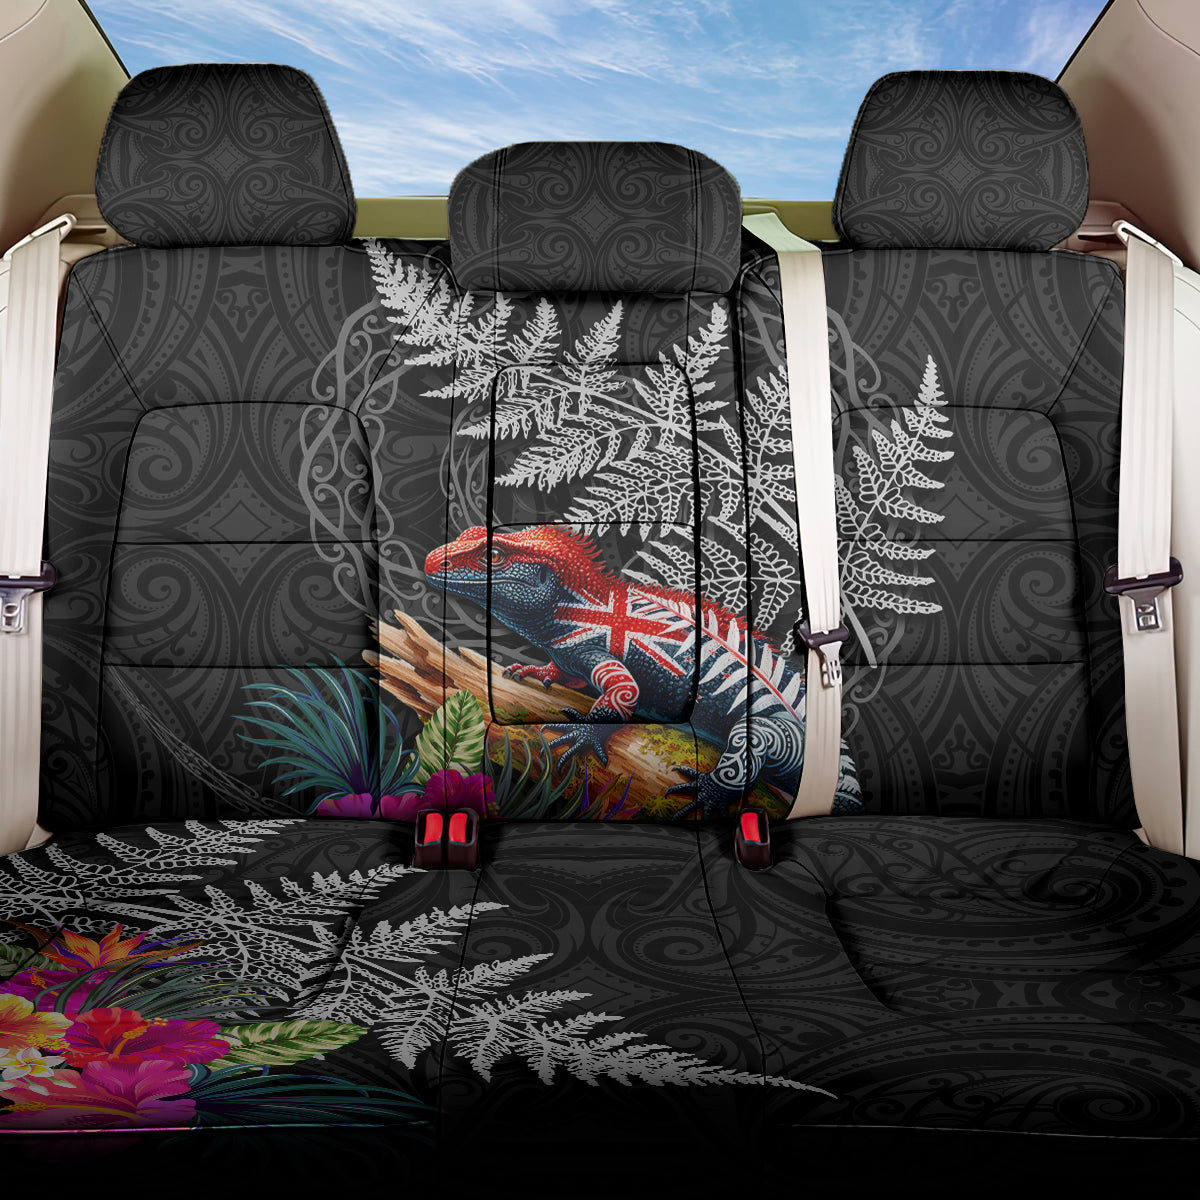 New Zealand Tuatara Back Car Seat Cover Silver Fern Hibiscus and Tribal Maori Pattern Black Color